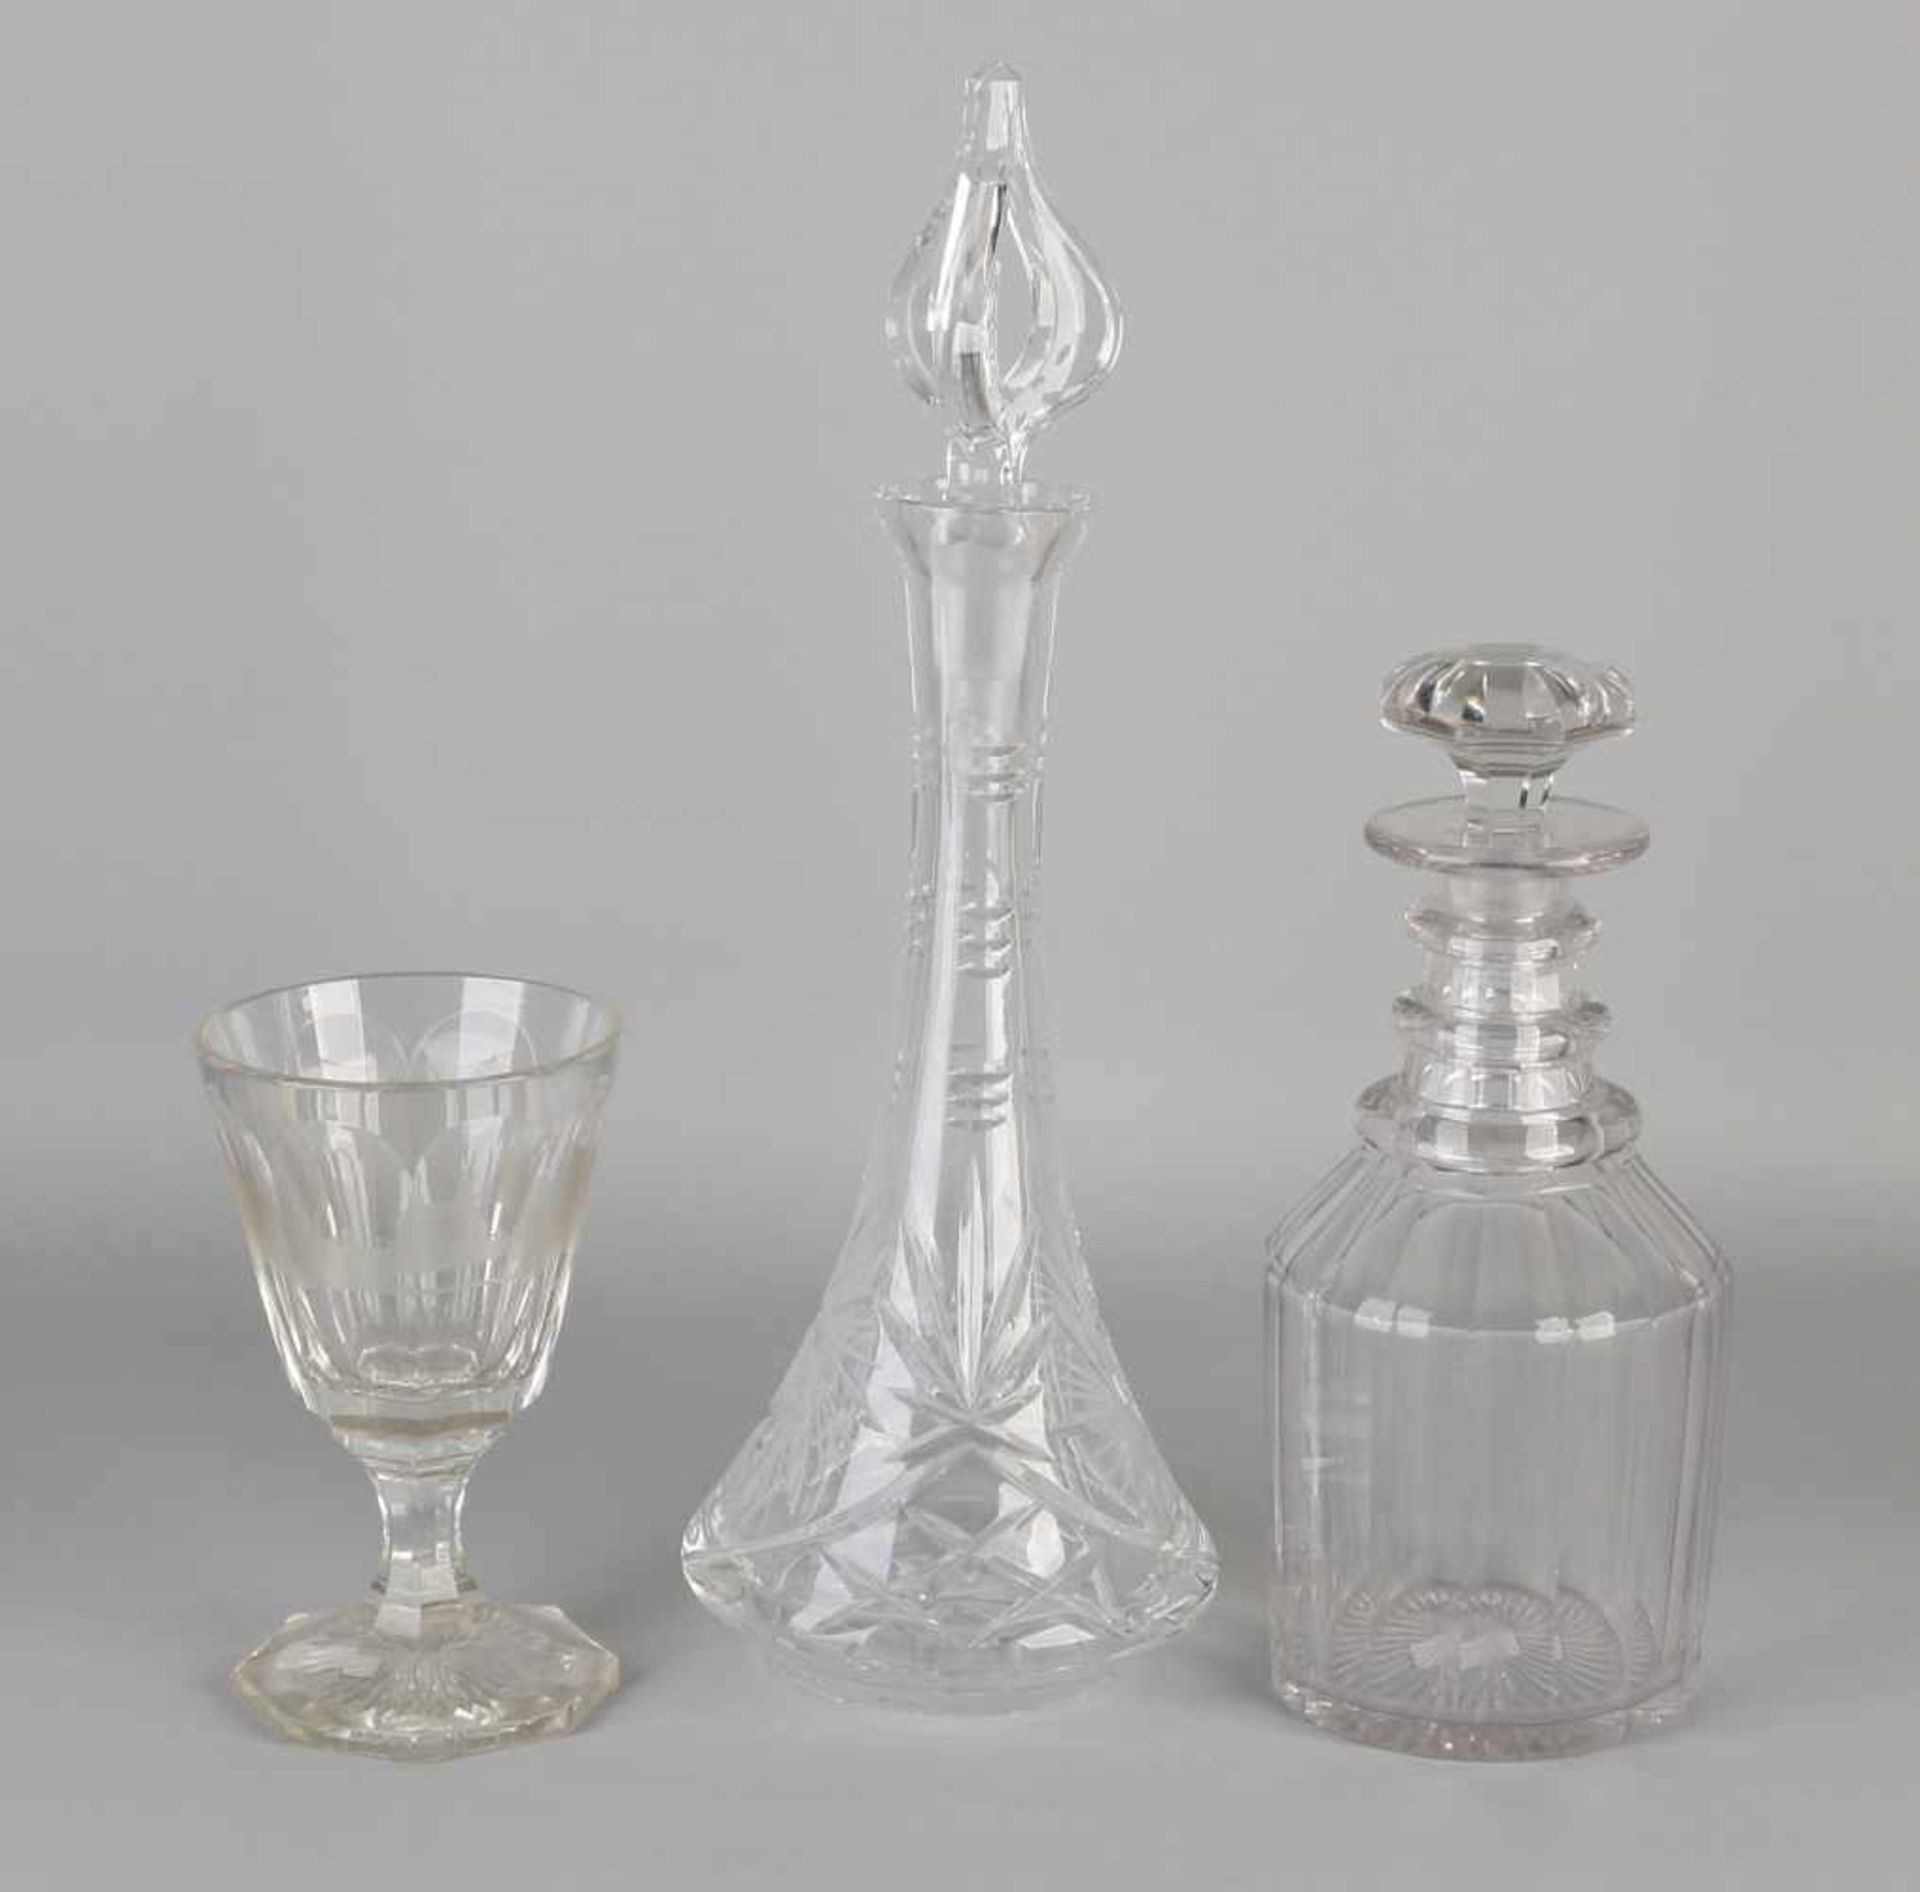 Three times old / antique crystal glass. Comprising: Etched glass in 1844, Castle Warmbrunn in